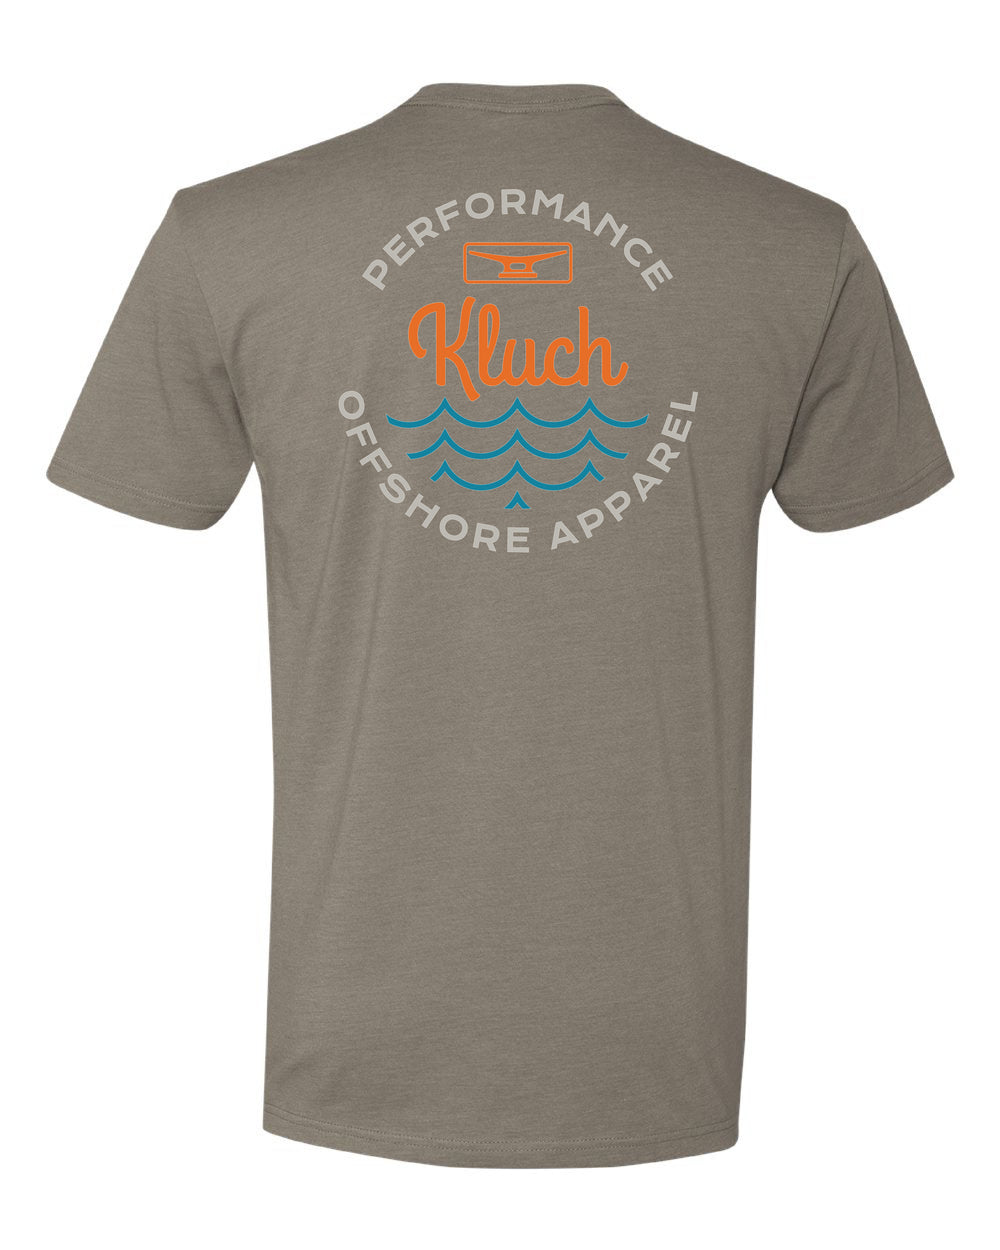 Kluch Offshore Mens T Shirt - Kluch Apparel